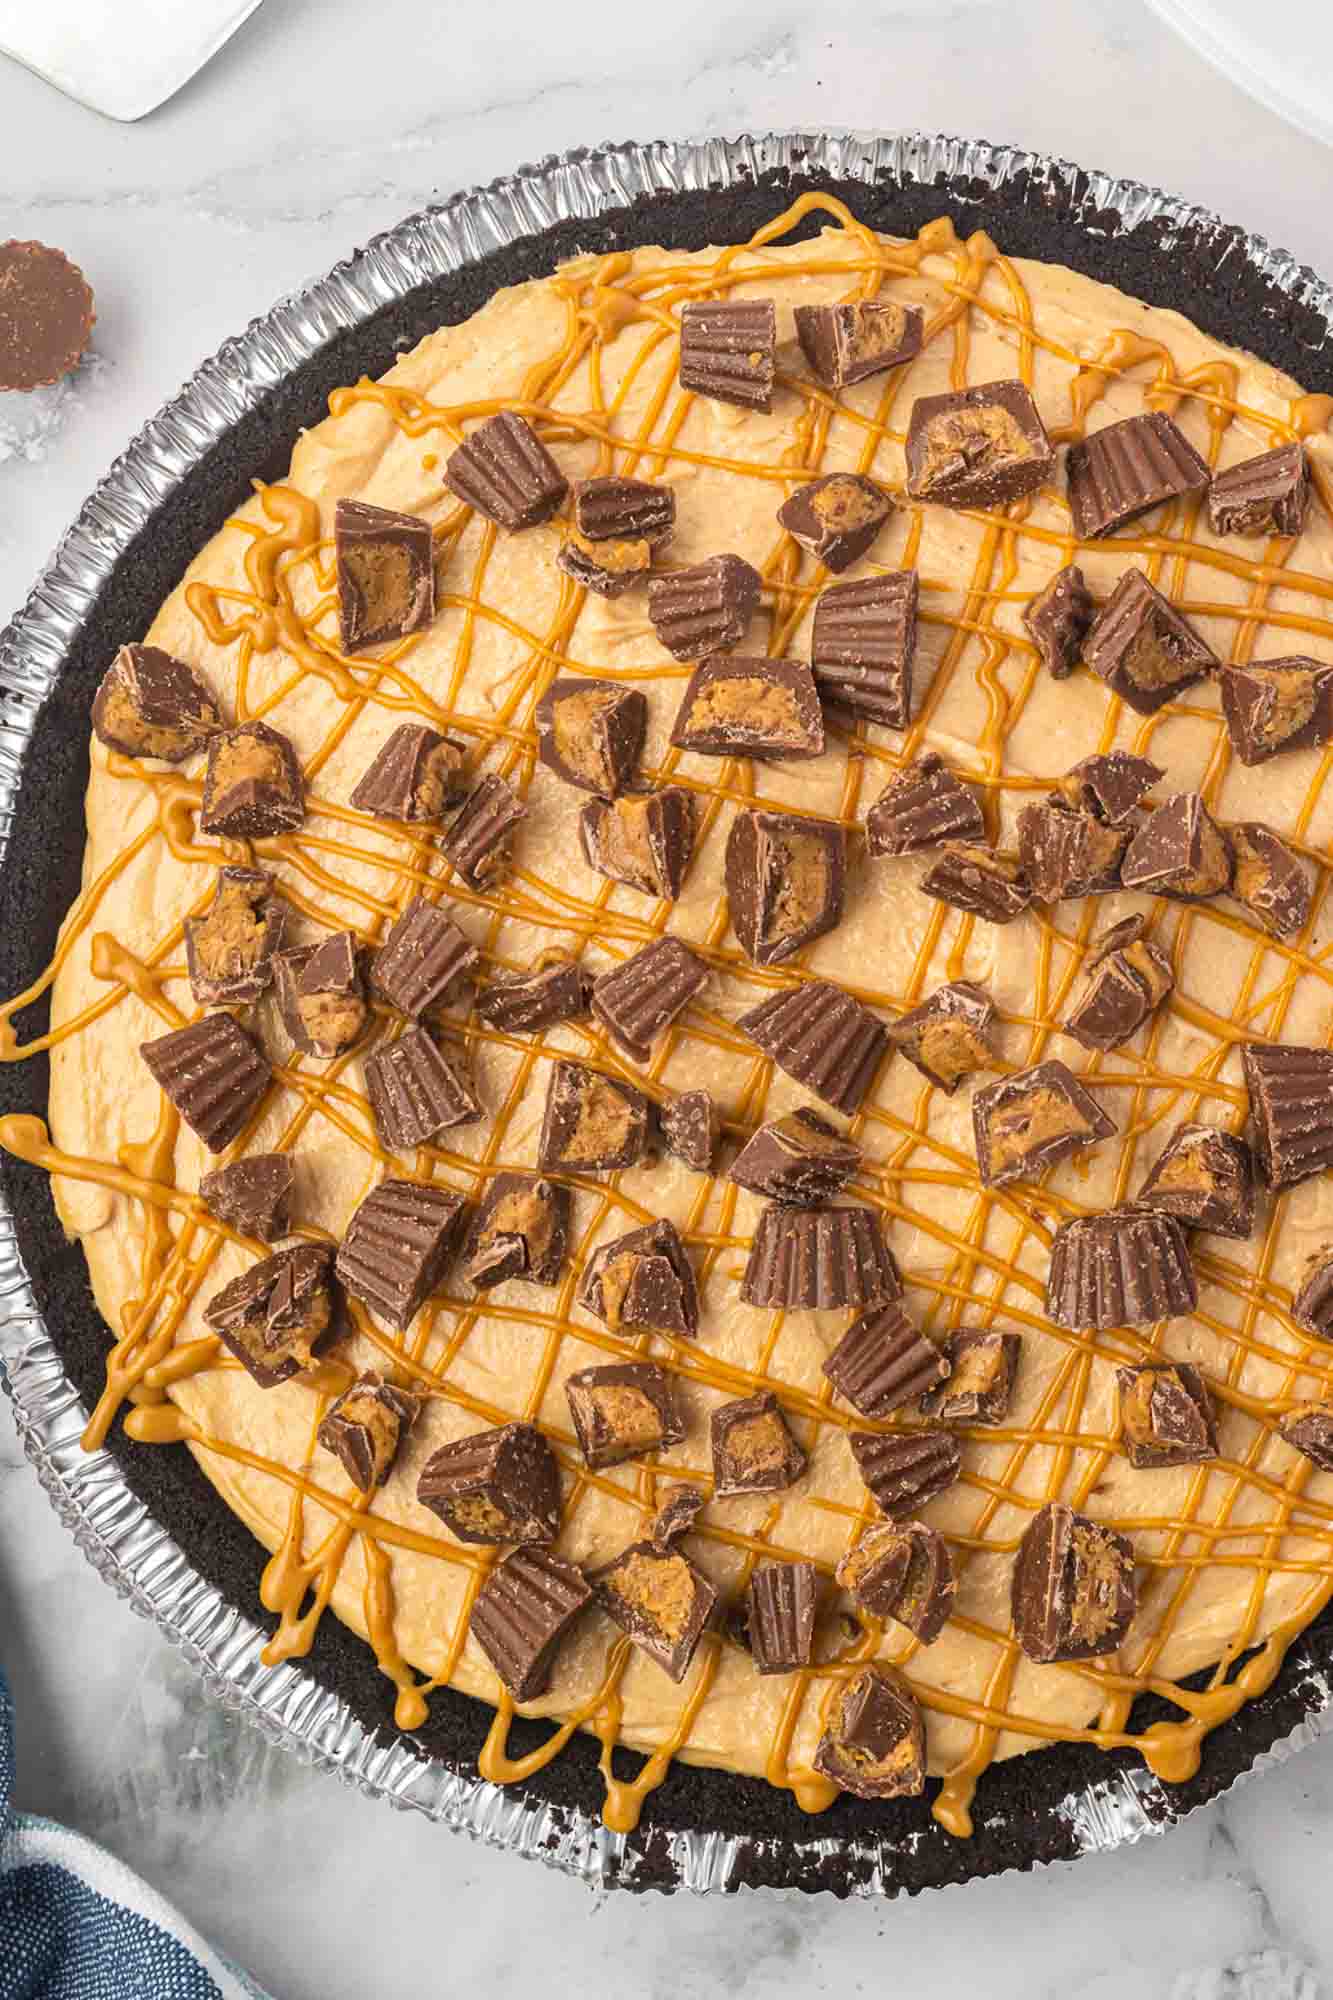 a full no bake peanut butter pie made in a premade chocolate graham cracker crust. The pie is drizzled with peanut butter and covered with mini reese's cups.